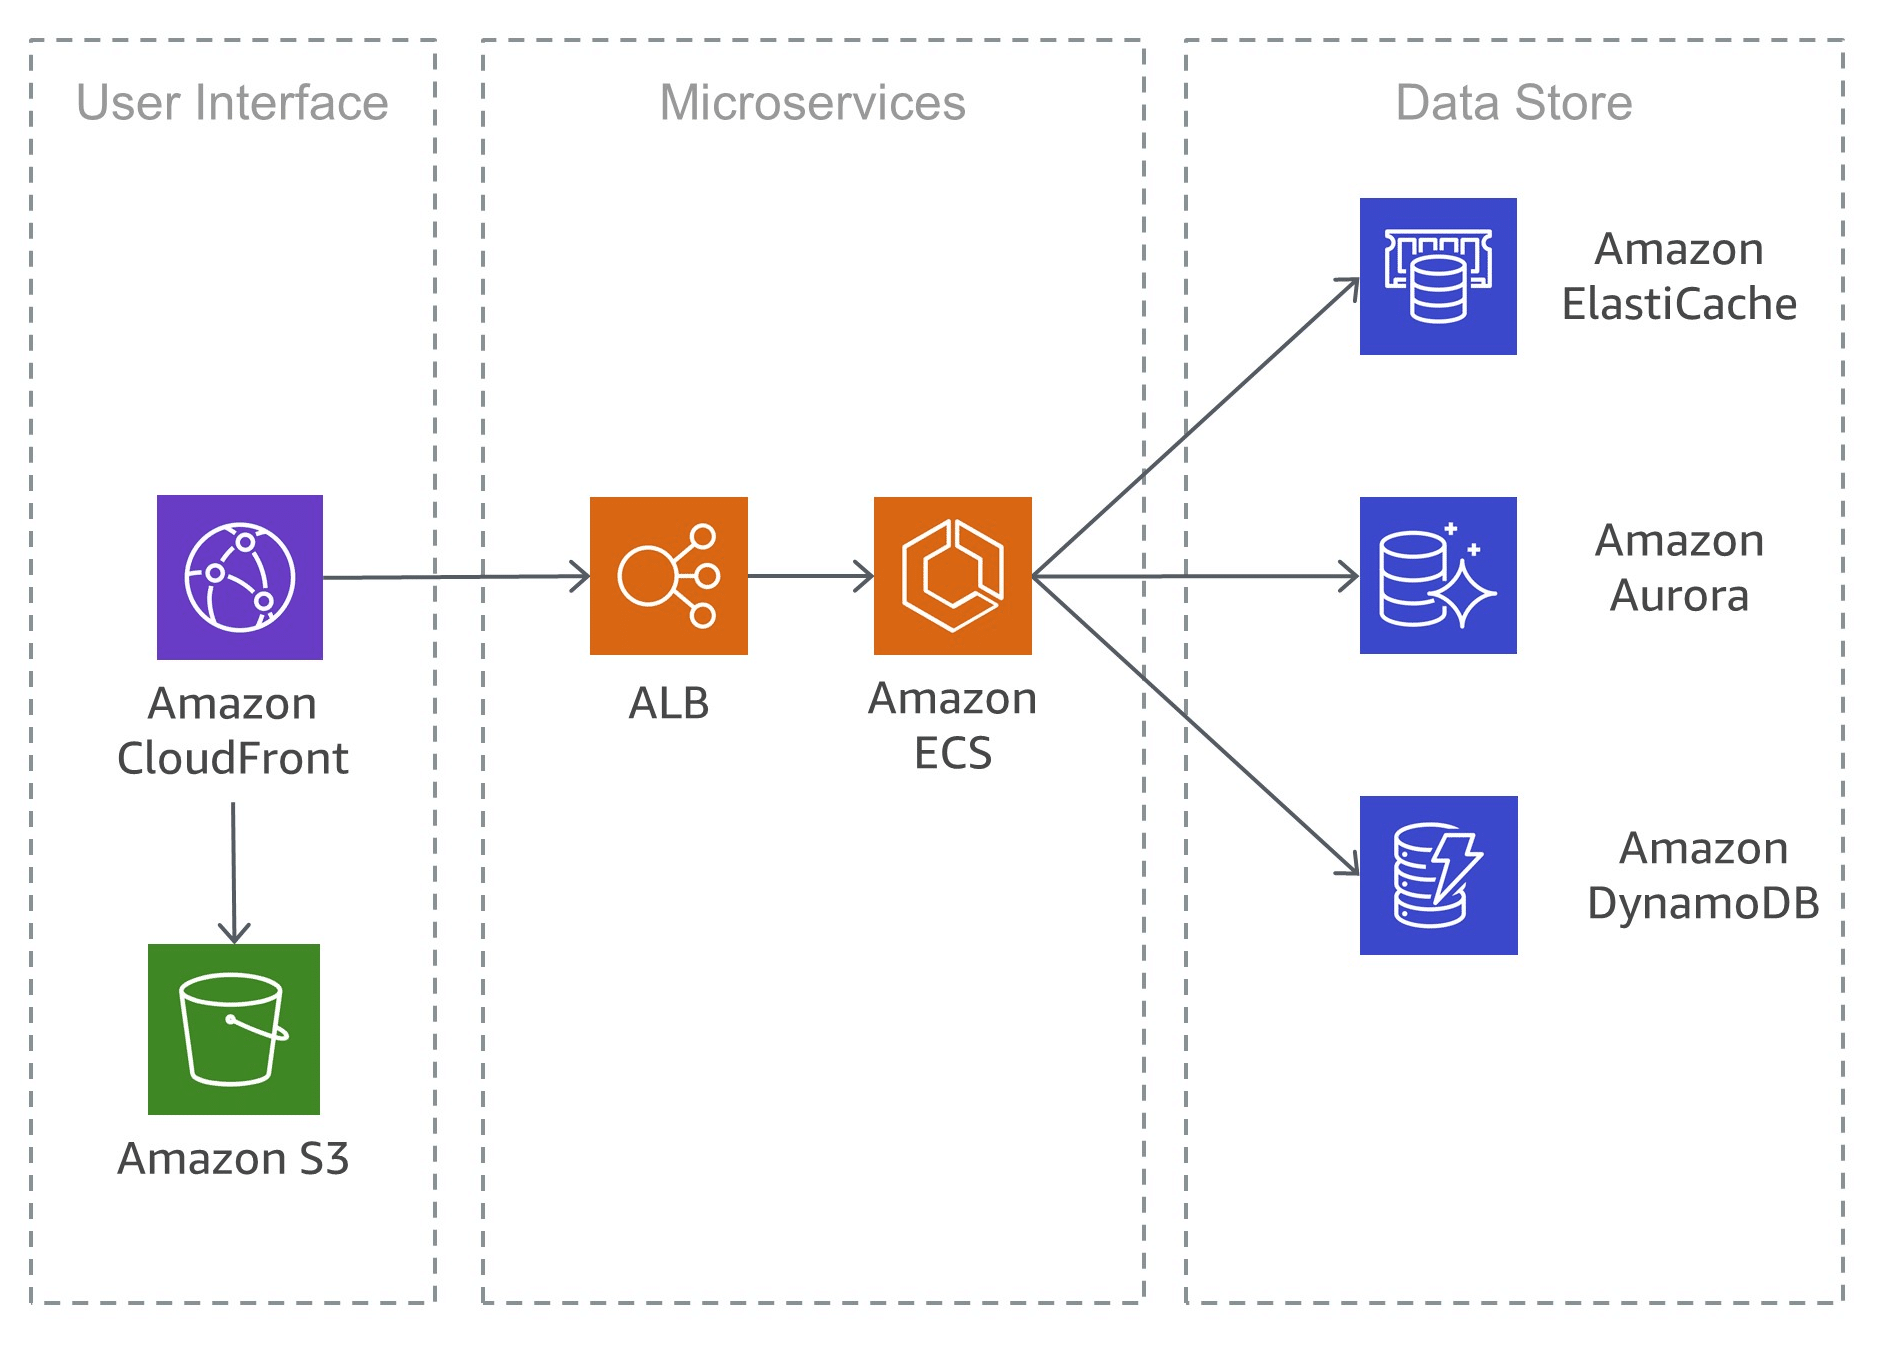 Typical microservices architecture on AWS